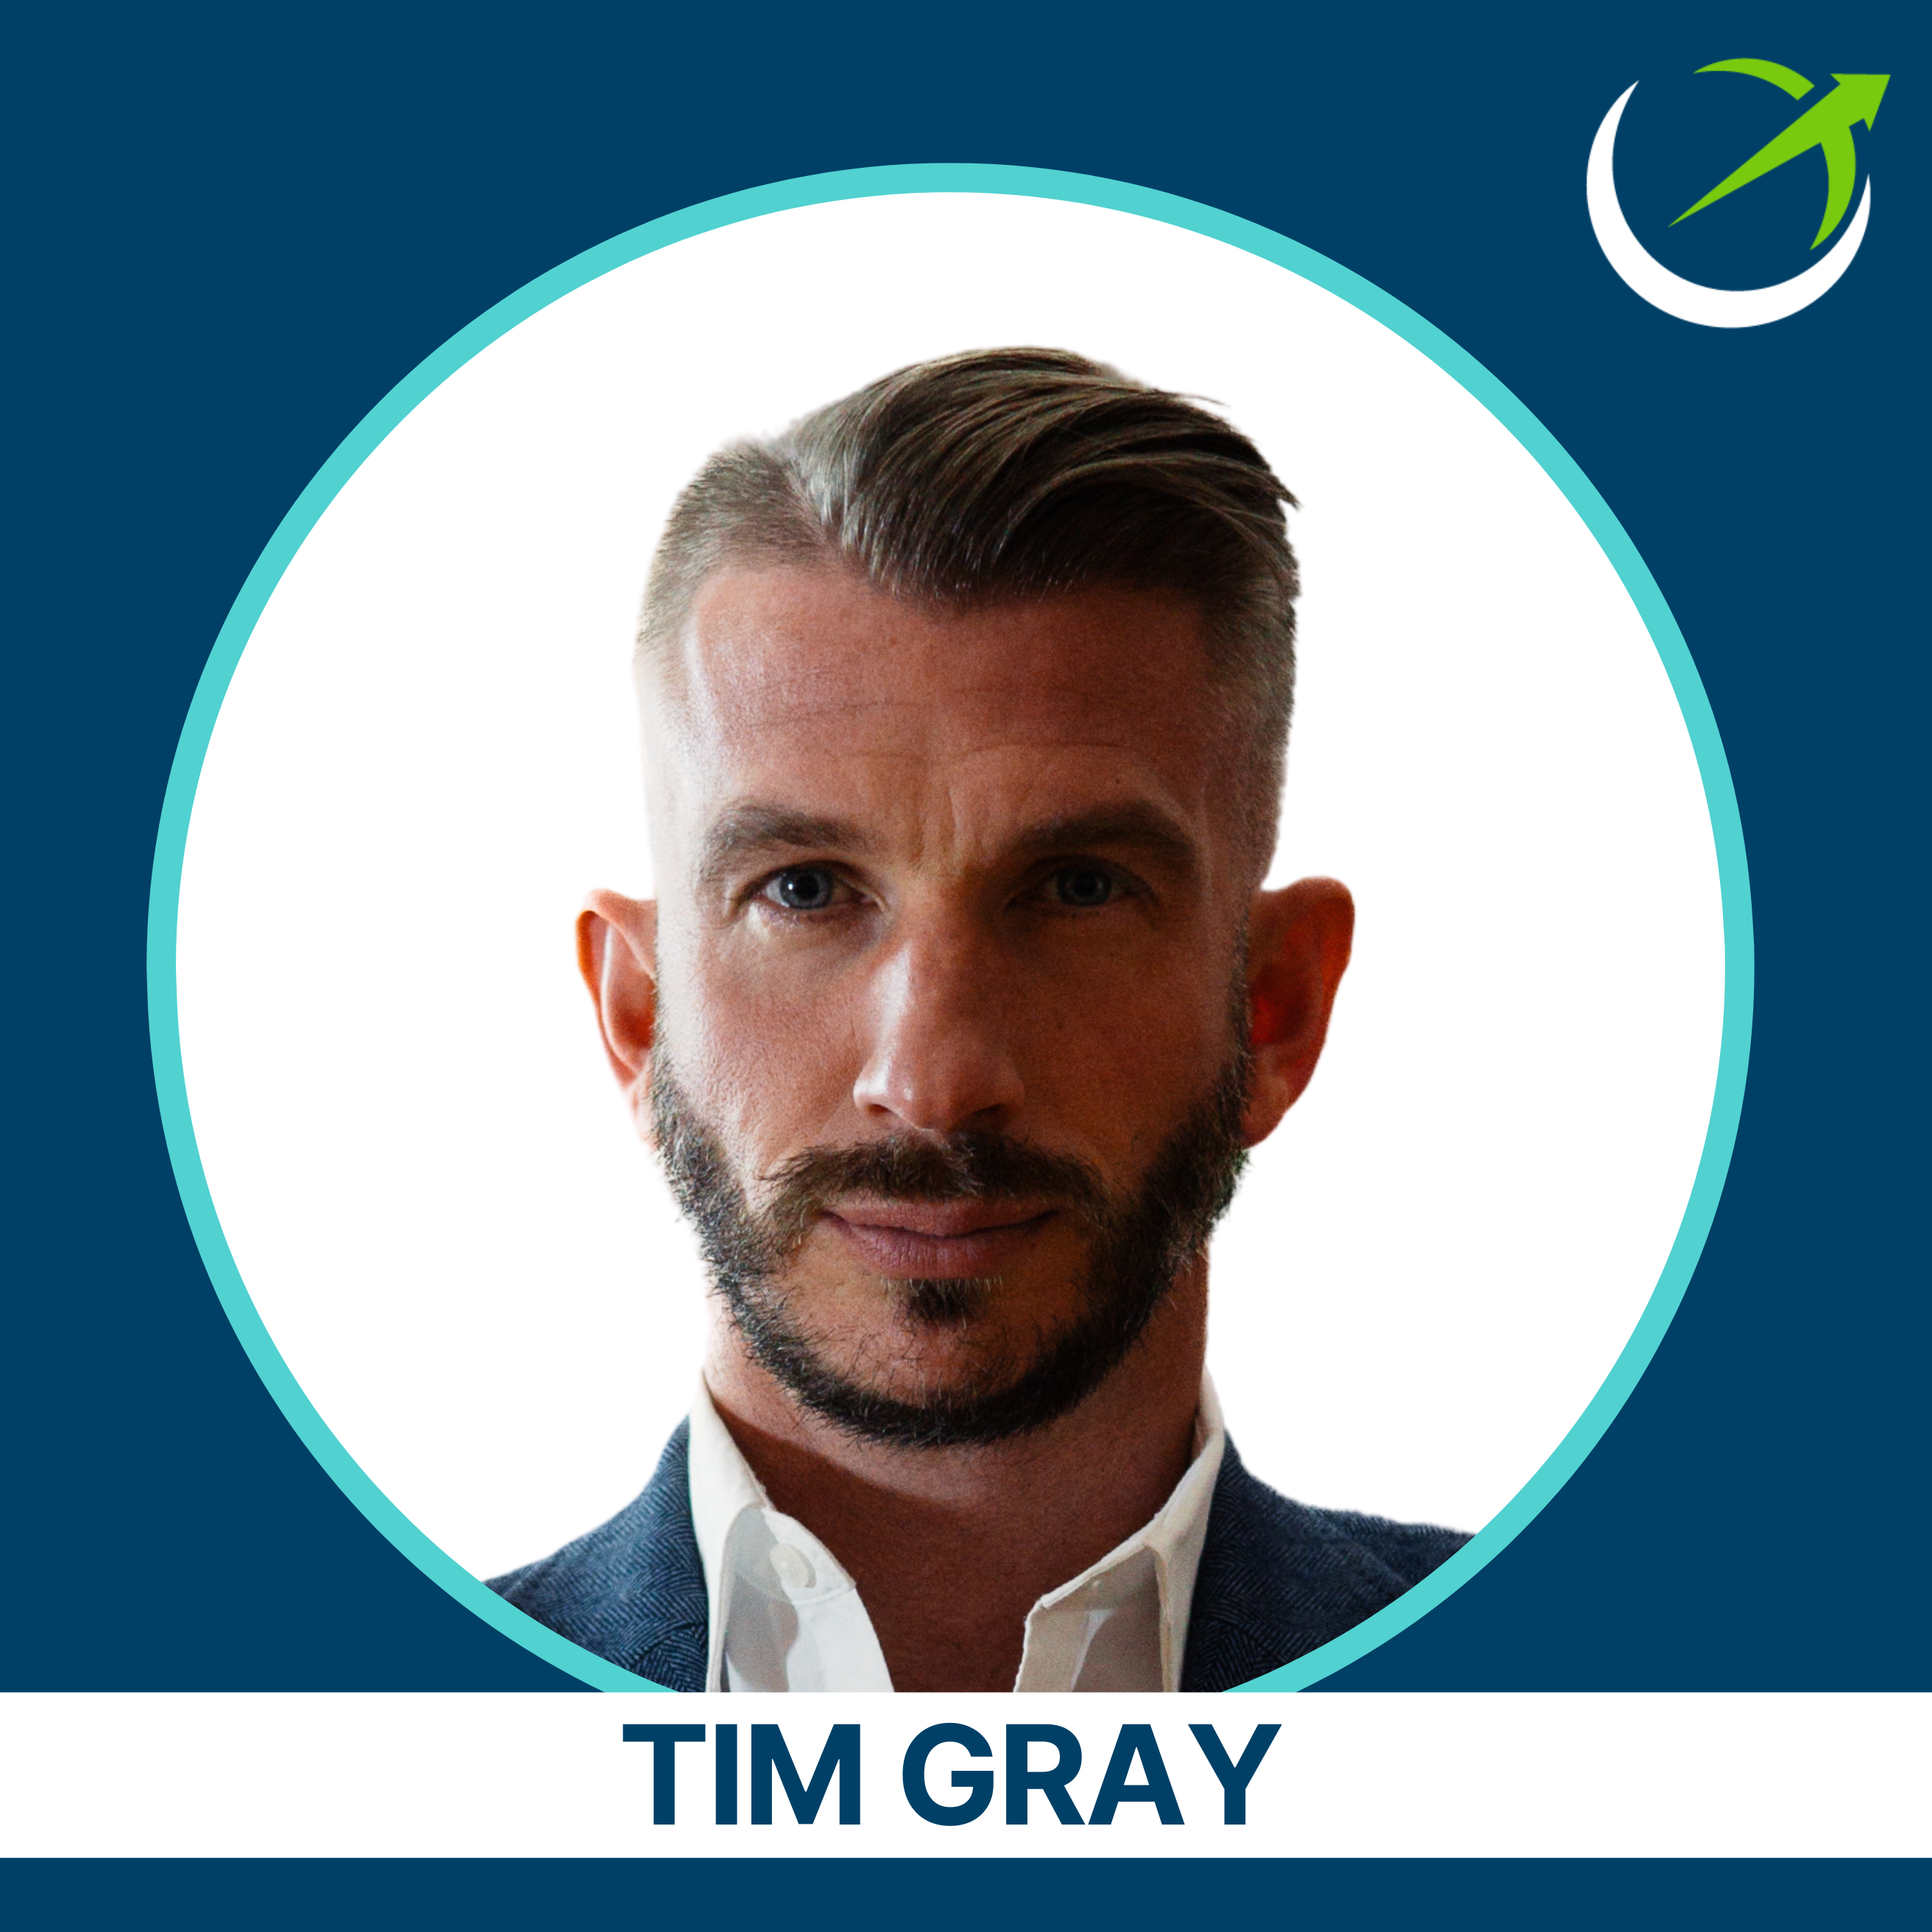 The Latest Health Hacks, How To Use Methylene Blue, The Guy Who Ate A Human Finger, Alcohol Microdosing & More With The UK's Leading Biohacker, Tim Gray.